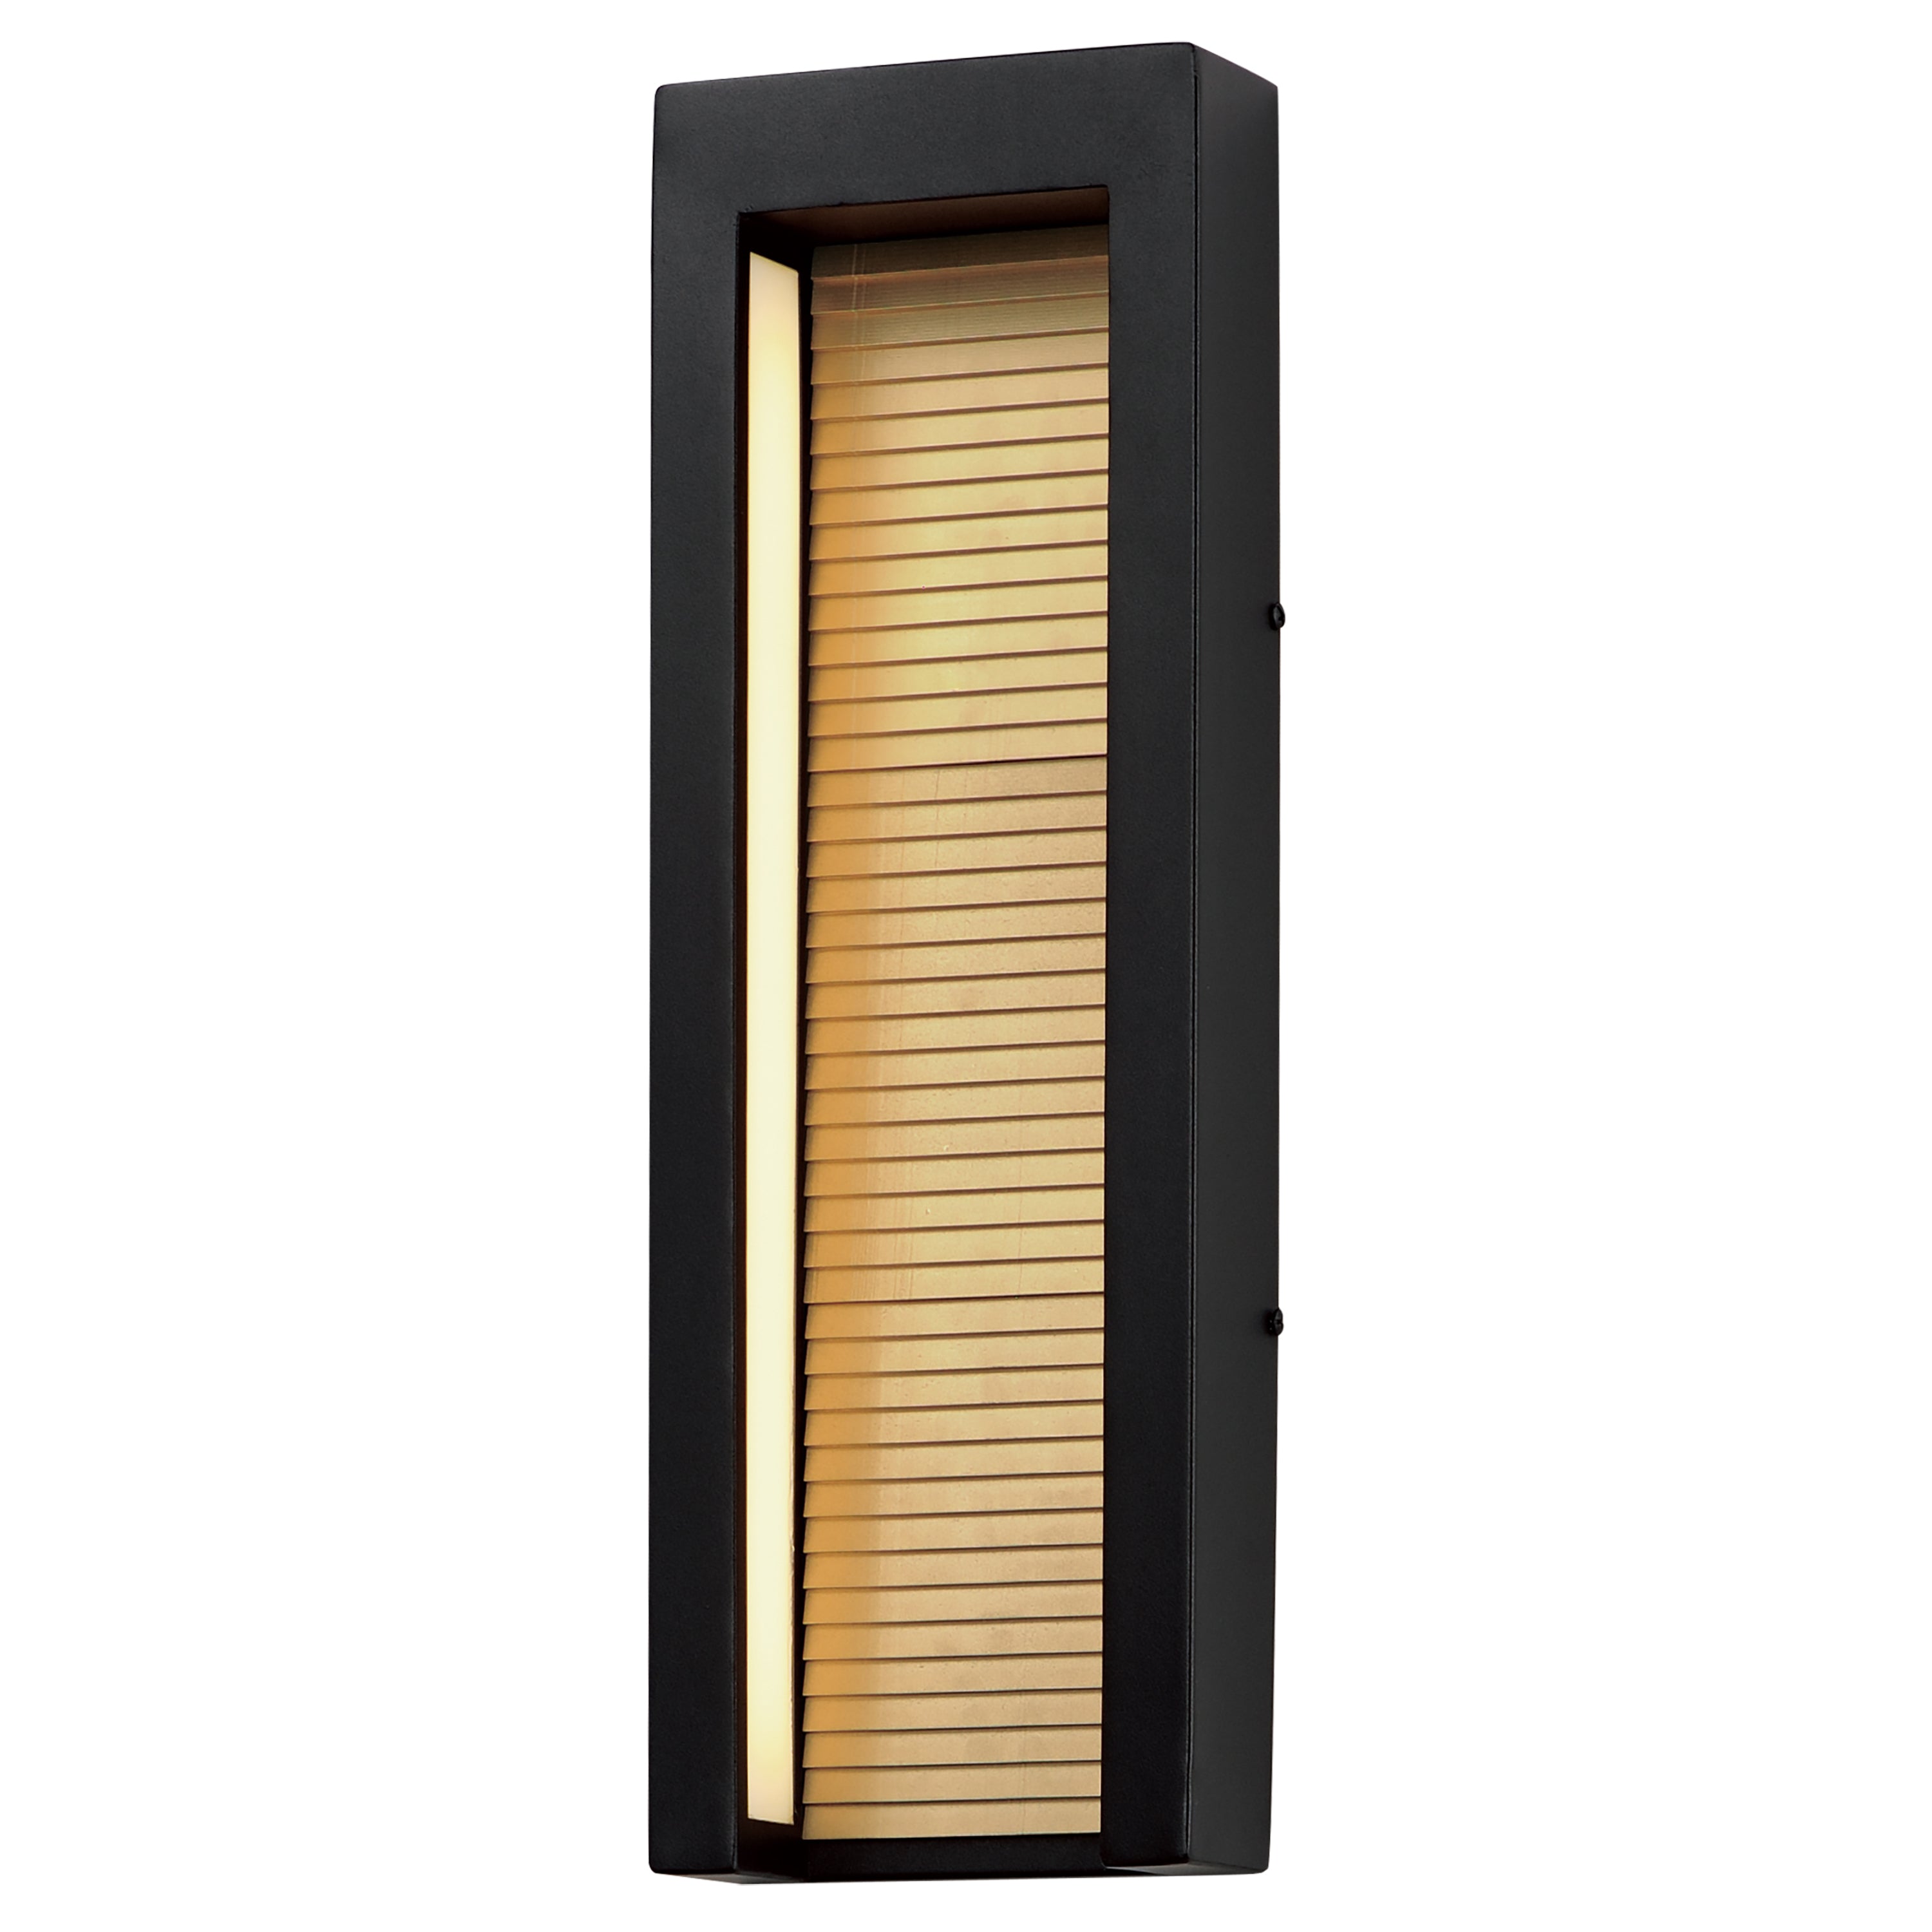 ALCOVE Outdoor wall sconce Black, Gold INTEGRATED LED - E30106-BKGLD | MAXIM/ET3